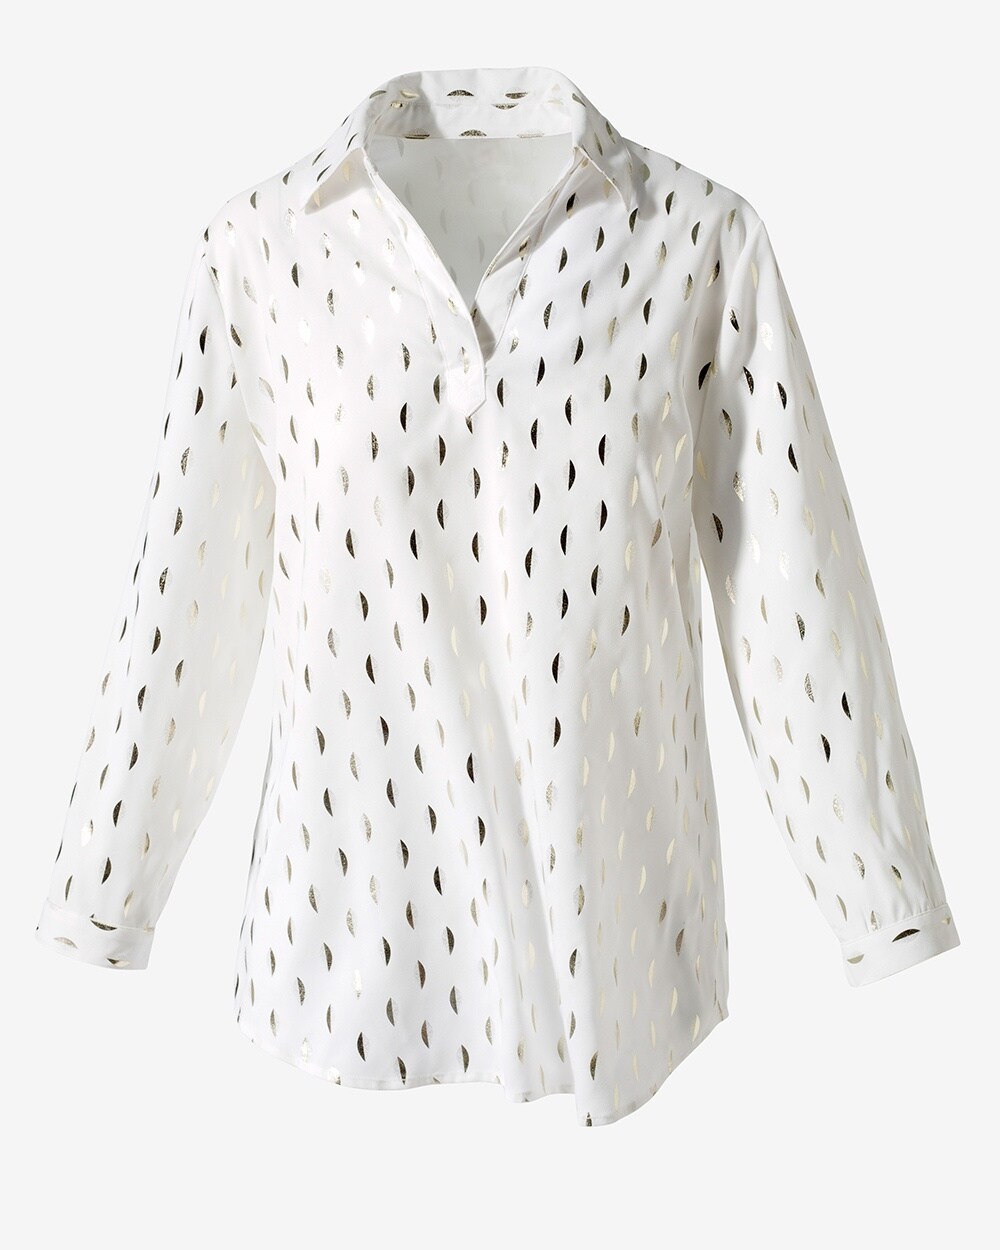 Cascading Foil Dots Collared Top